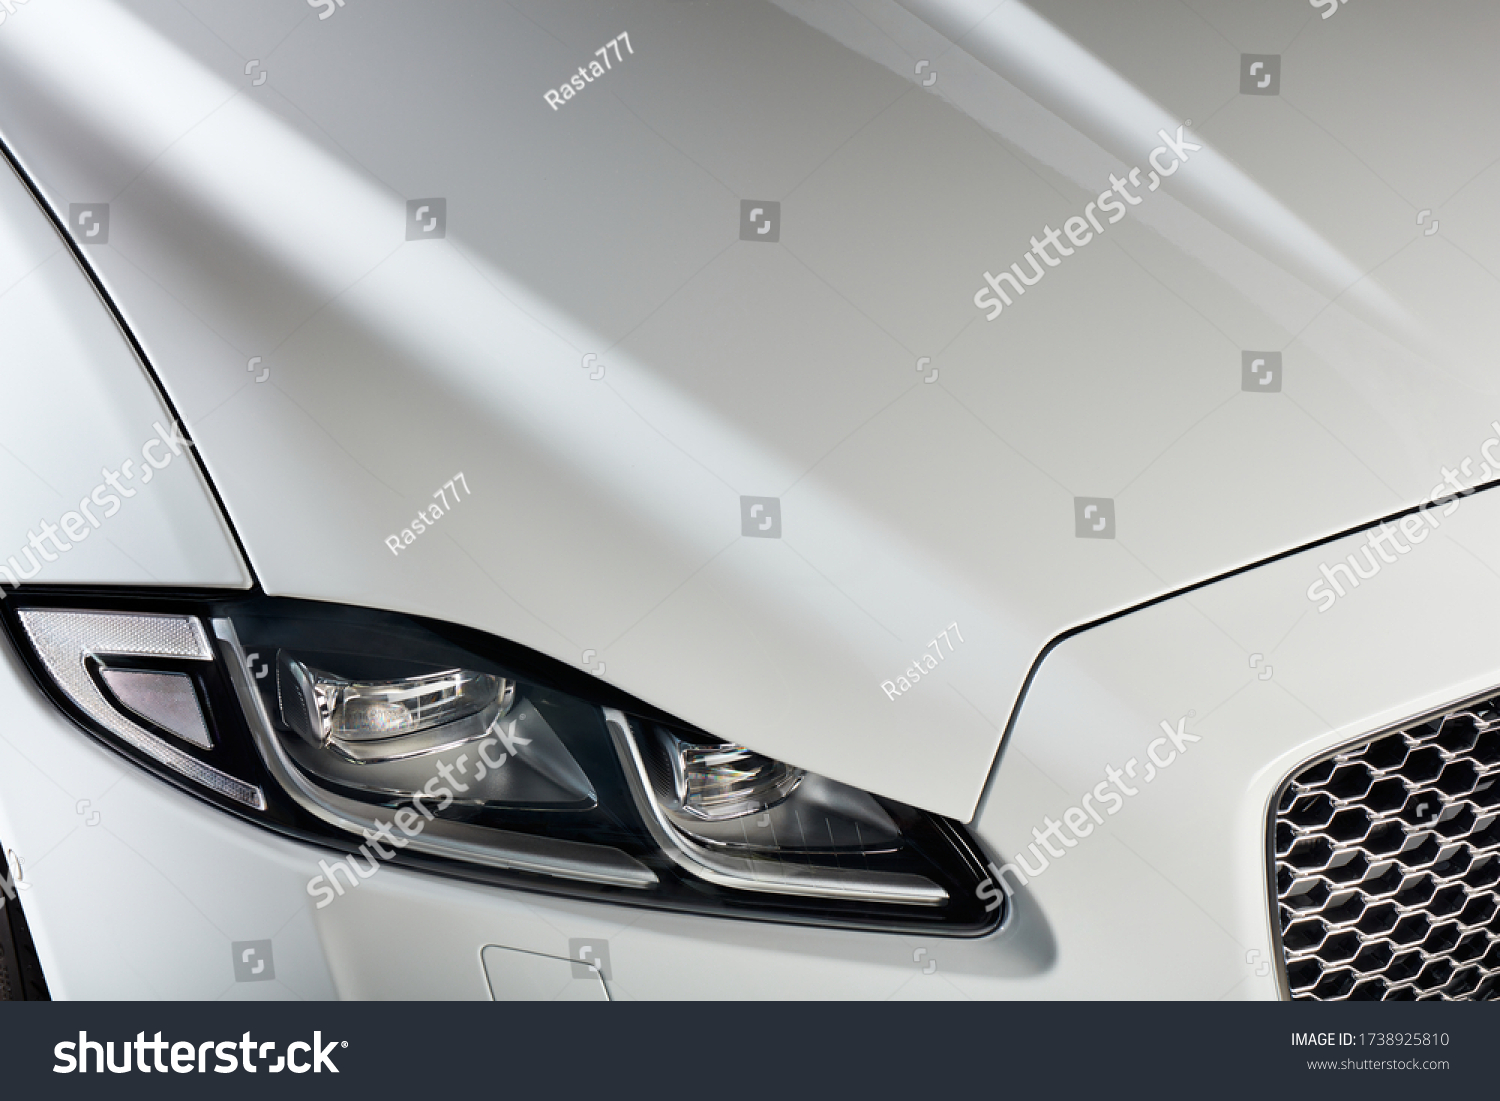 The headlight and bonnet of a white car. A modern and luxurious car. #1738925810